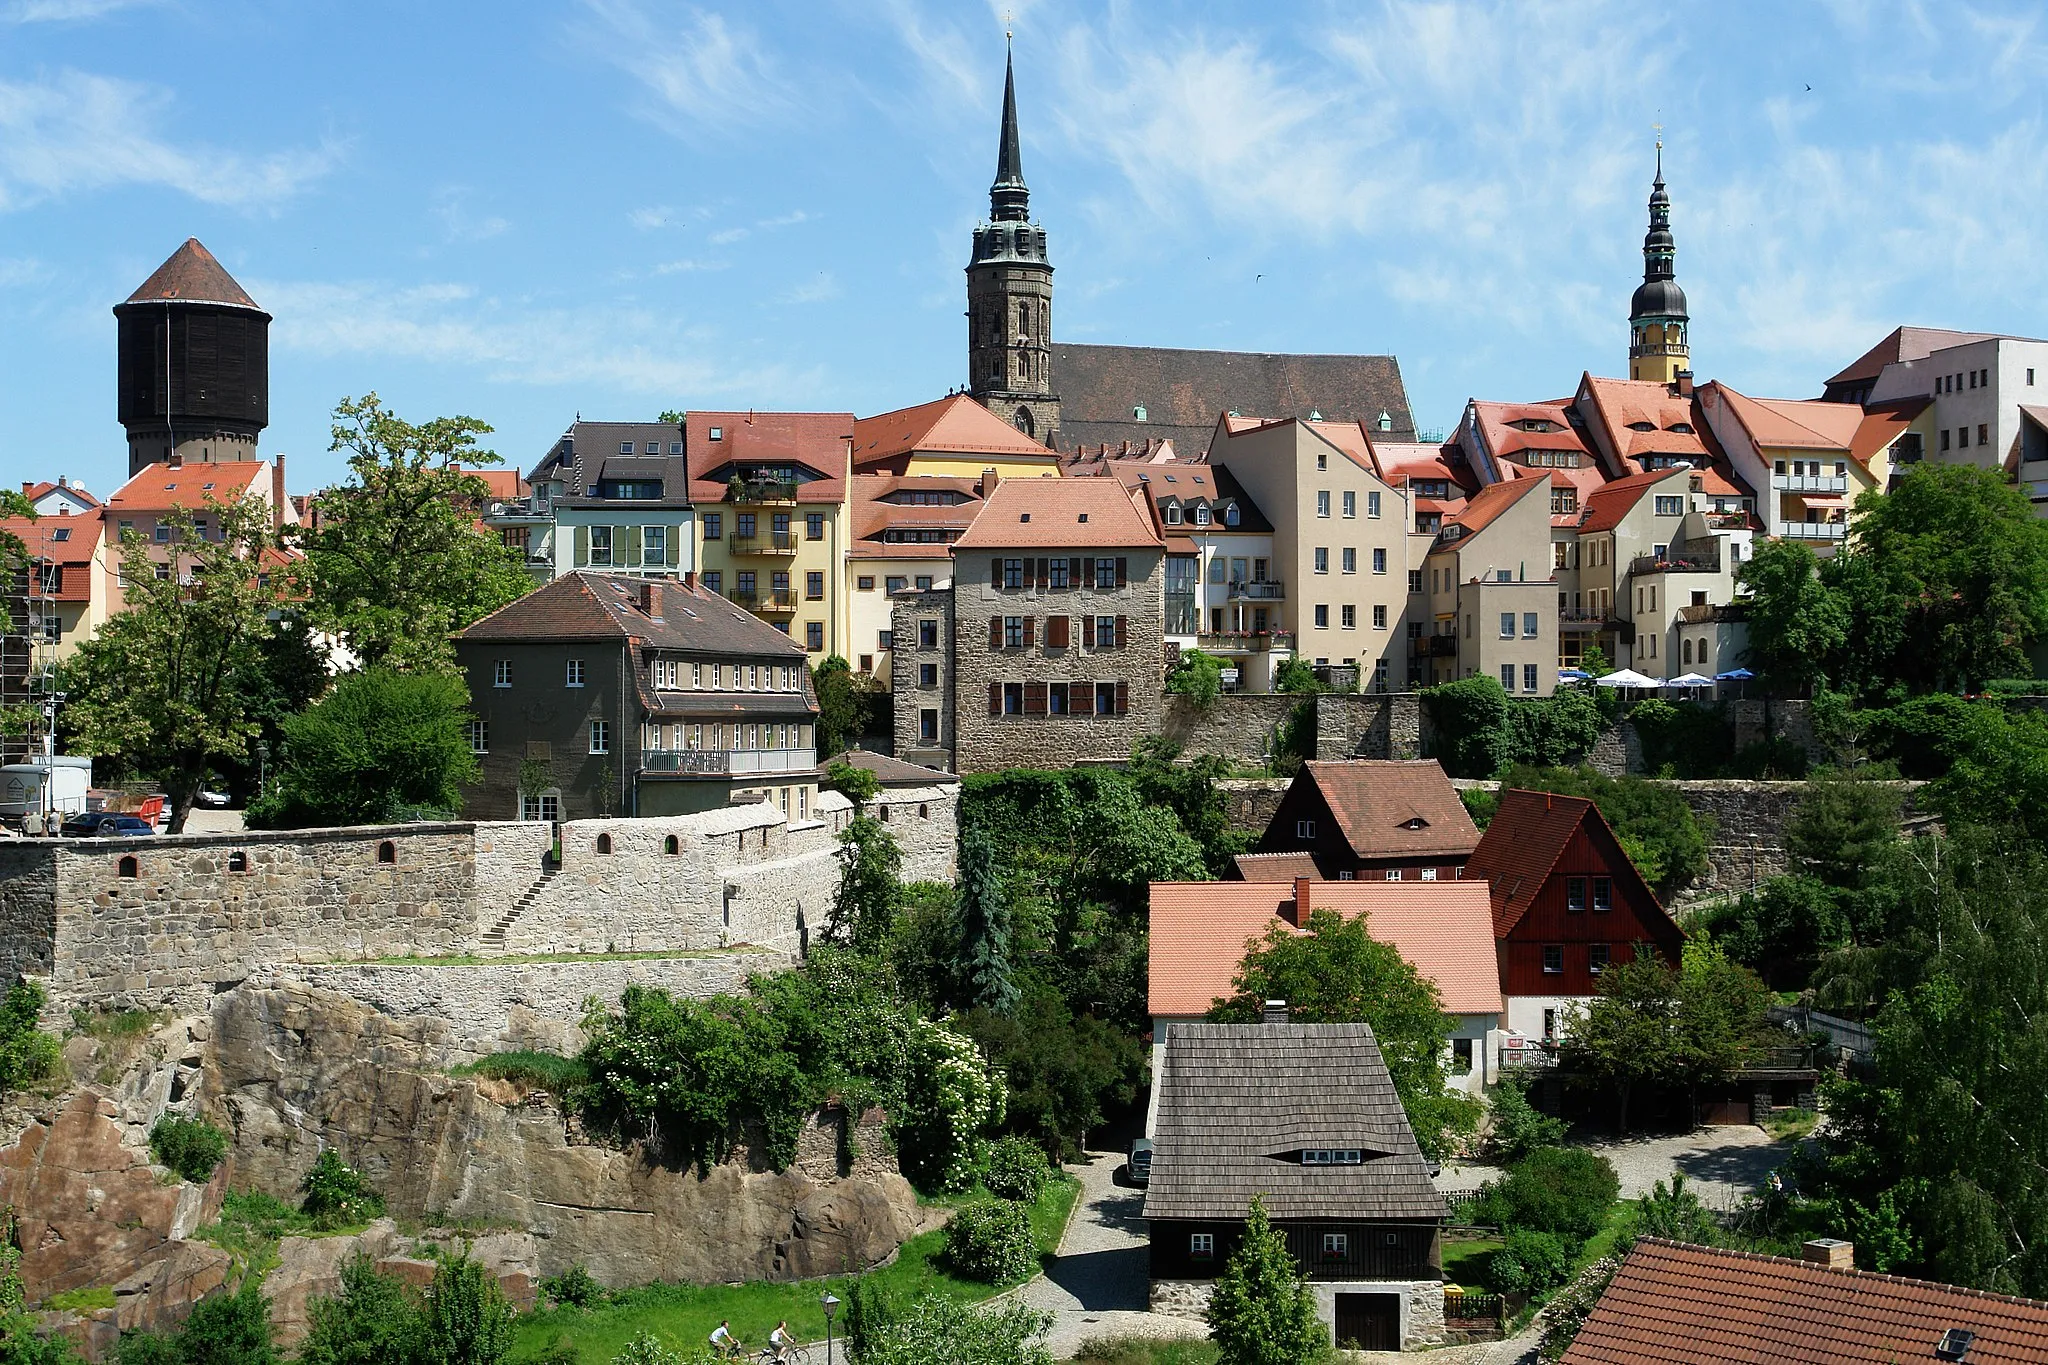 Photo showing: View from the Friedensbrücke to the town Bautzen in Saxony, Germany. In the foreground the so-called Hexenhäuschen (before 1604). In the centre the Mönchsbastei (1324) on Mühltorgasse. In the background (from left) the water tower (1877) in the ruins of the monk's church, the Dom St. Petri (1213/1221) and the Town Hall Bautzen (1213/1705).